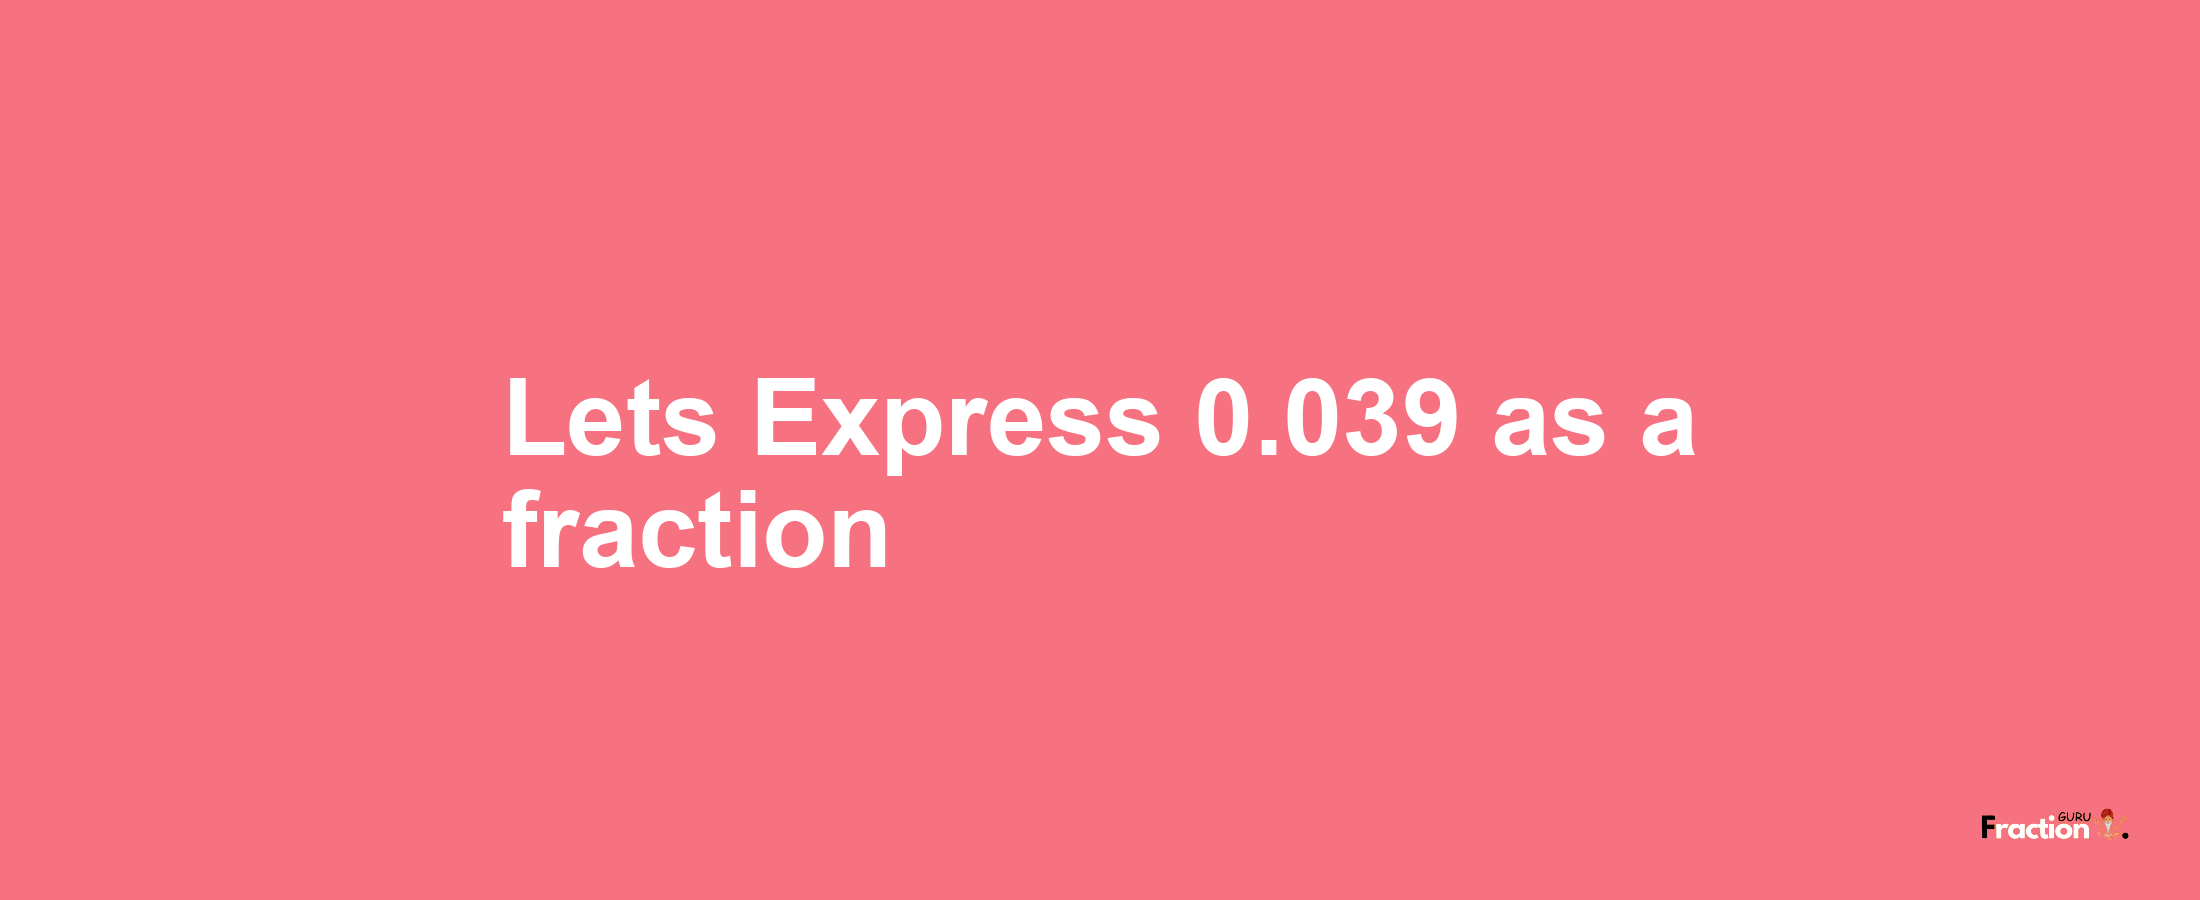 Lets Express 0.039 as afraction